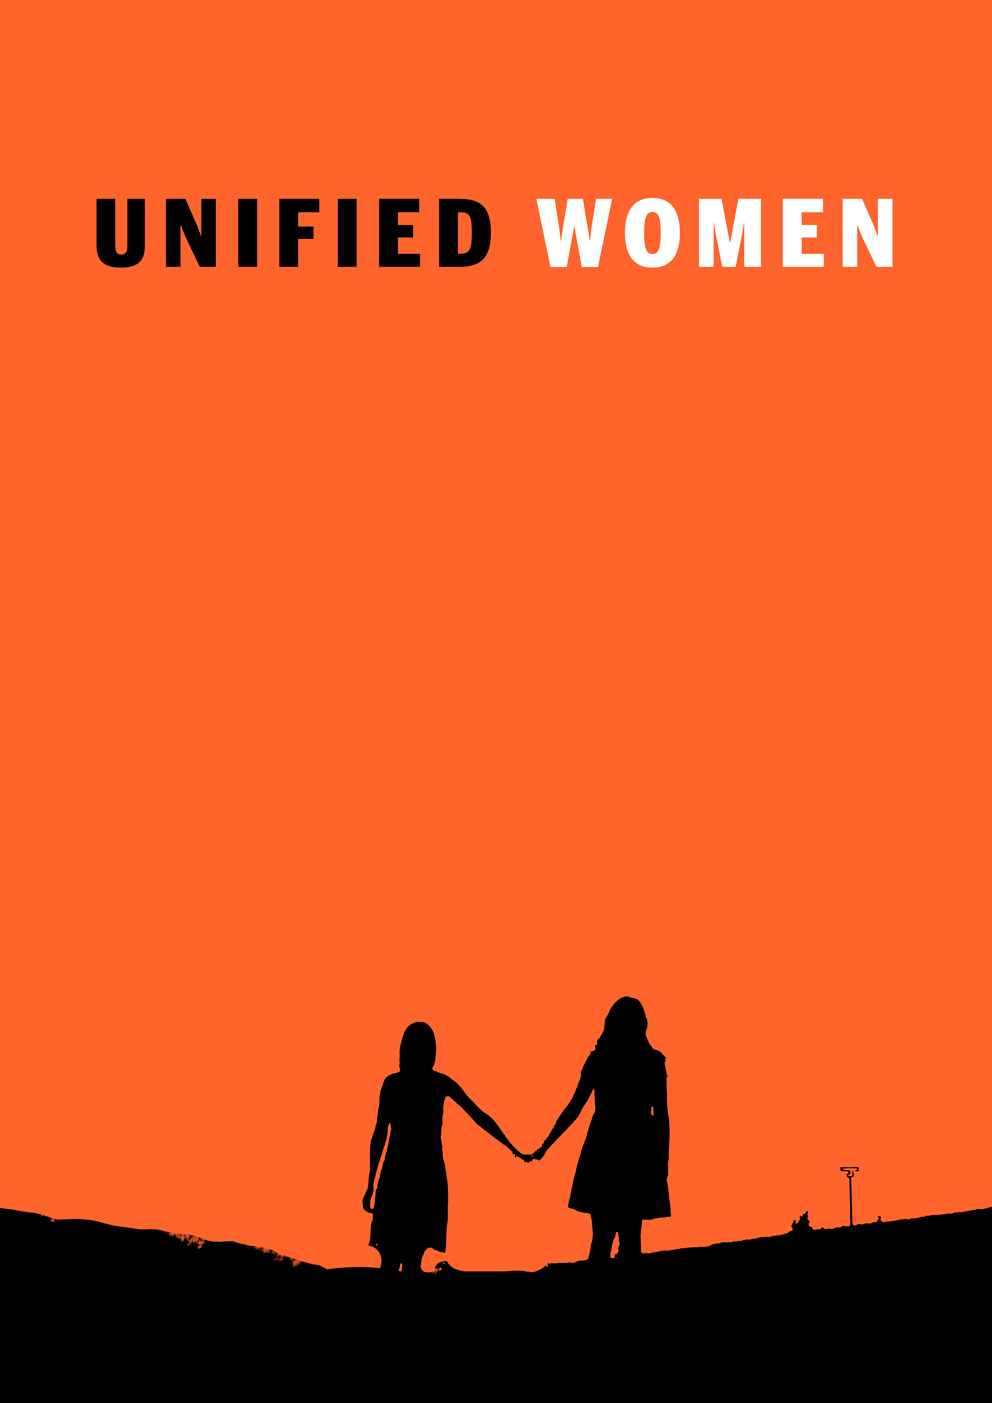 Unified Women artwork. Orange background with silhouettes of two young women standing outside holding hands.